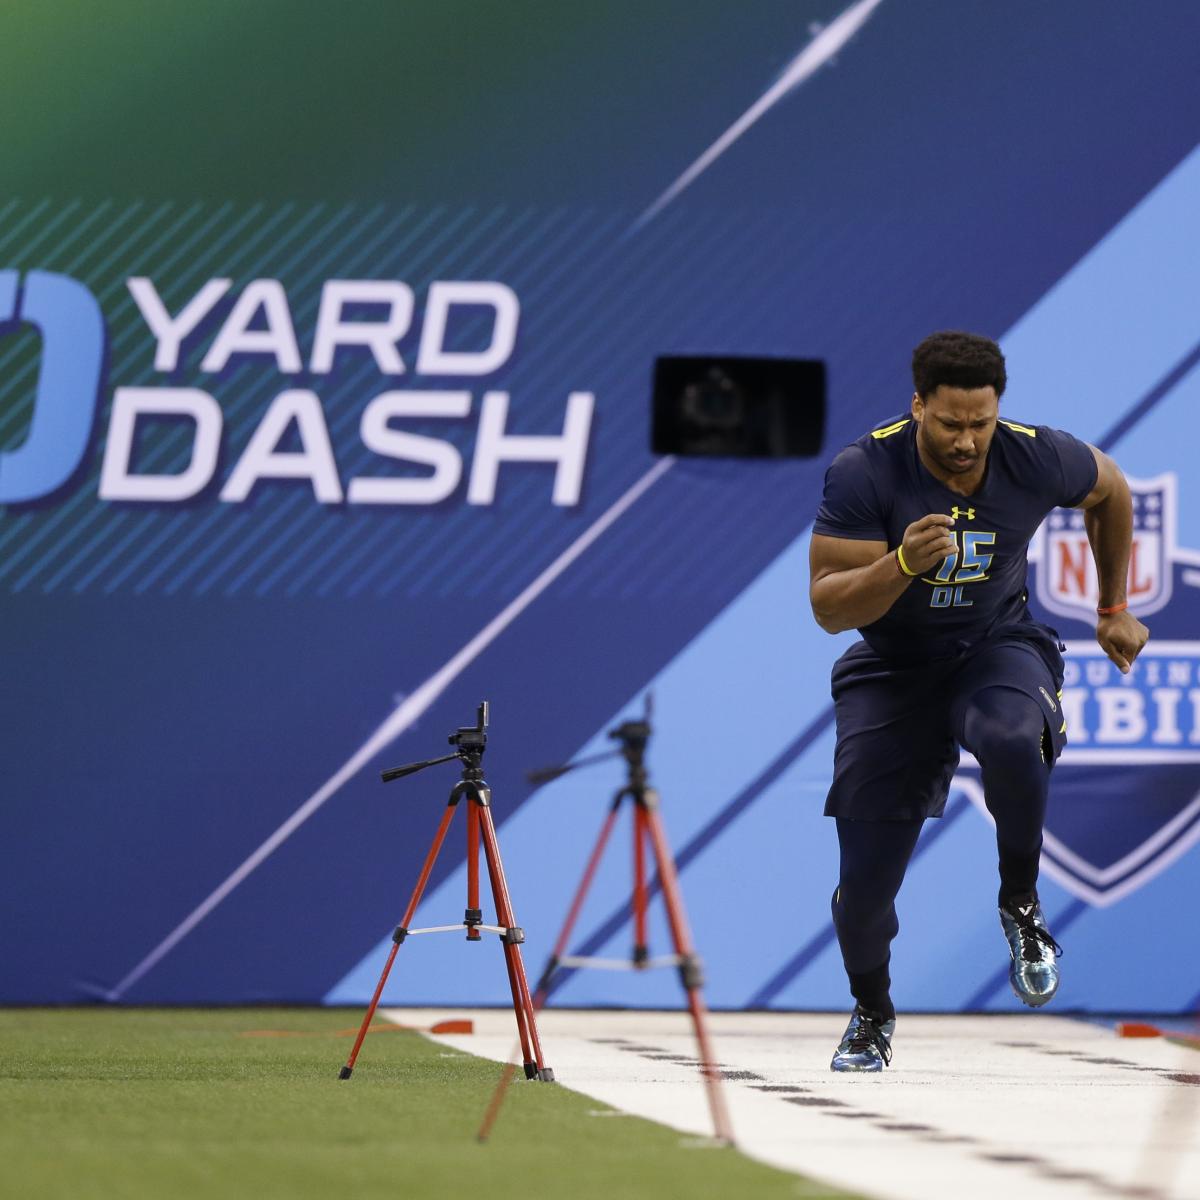 Survivor’s Guide to Reaching the NFL Draft Without Losing Your Mind